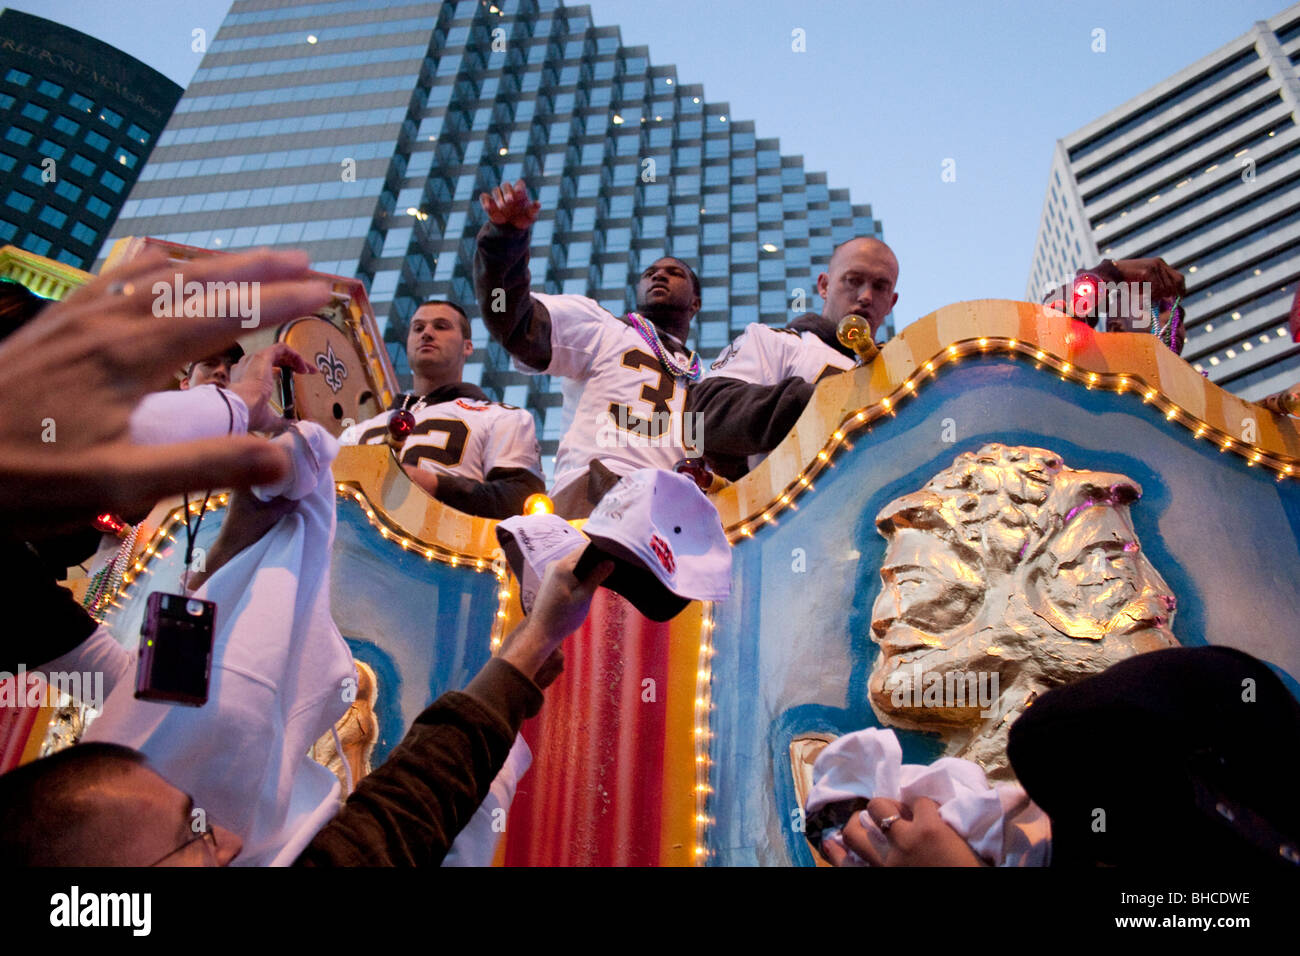 New Orleans Saints football players riding a float in the Saints congratulatory Super Bowl Champions parade.  Feb. 9, 2010. Stock Photo